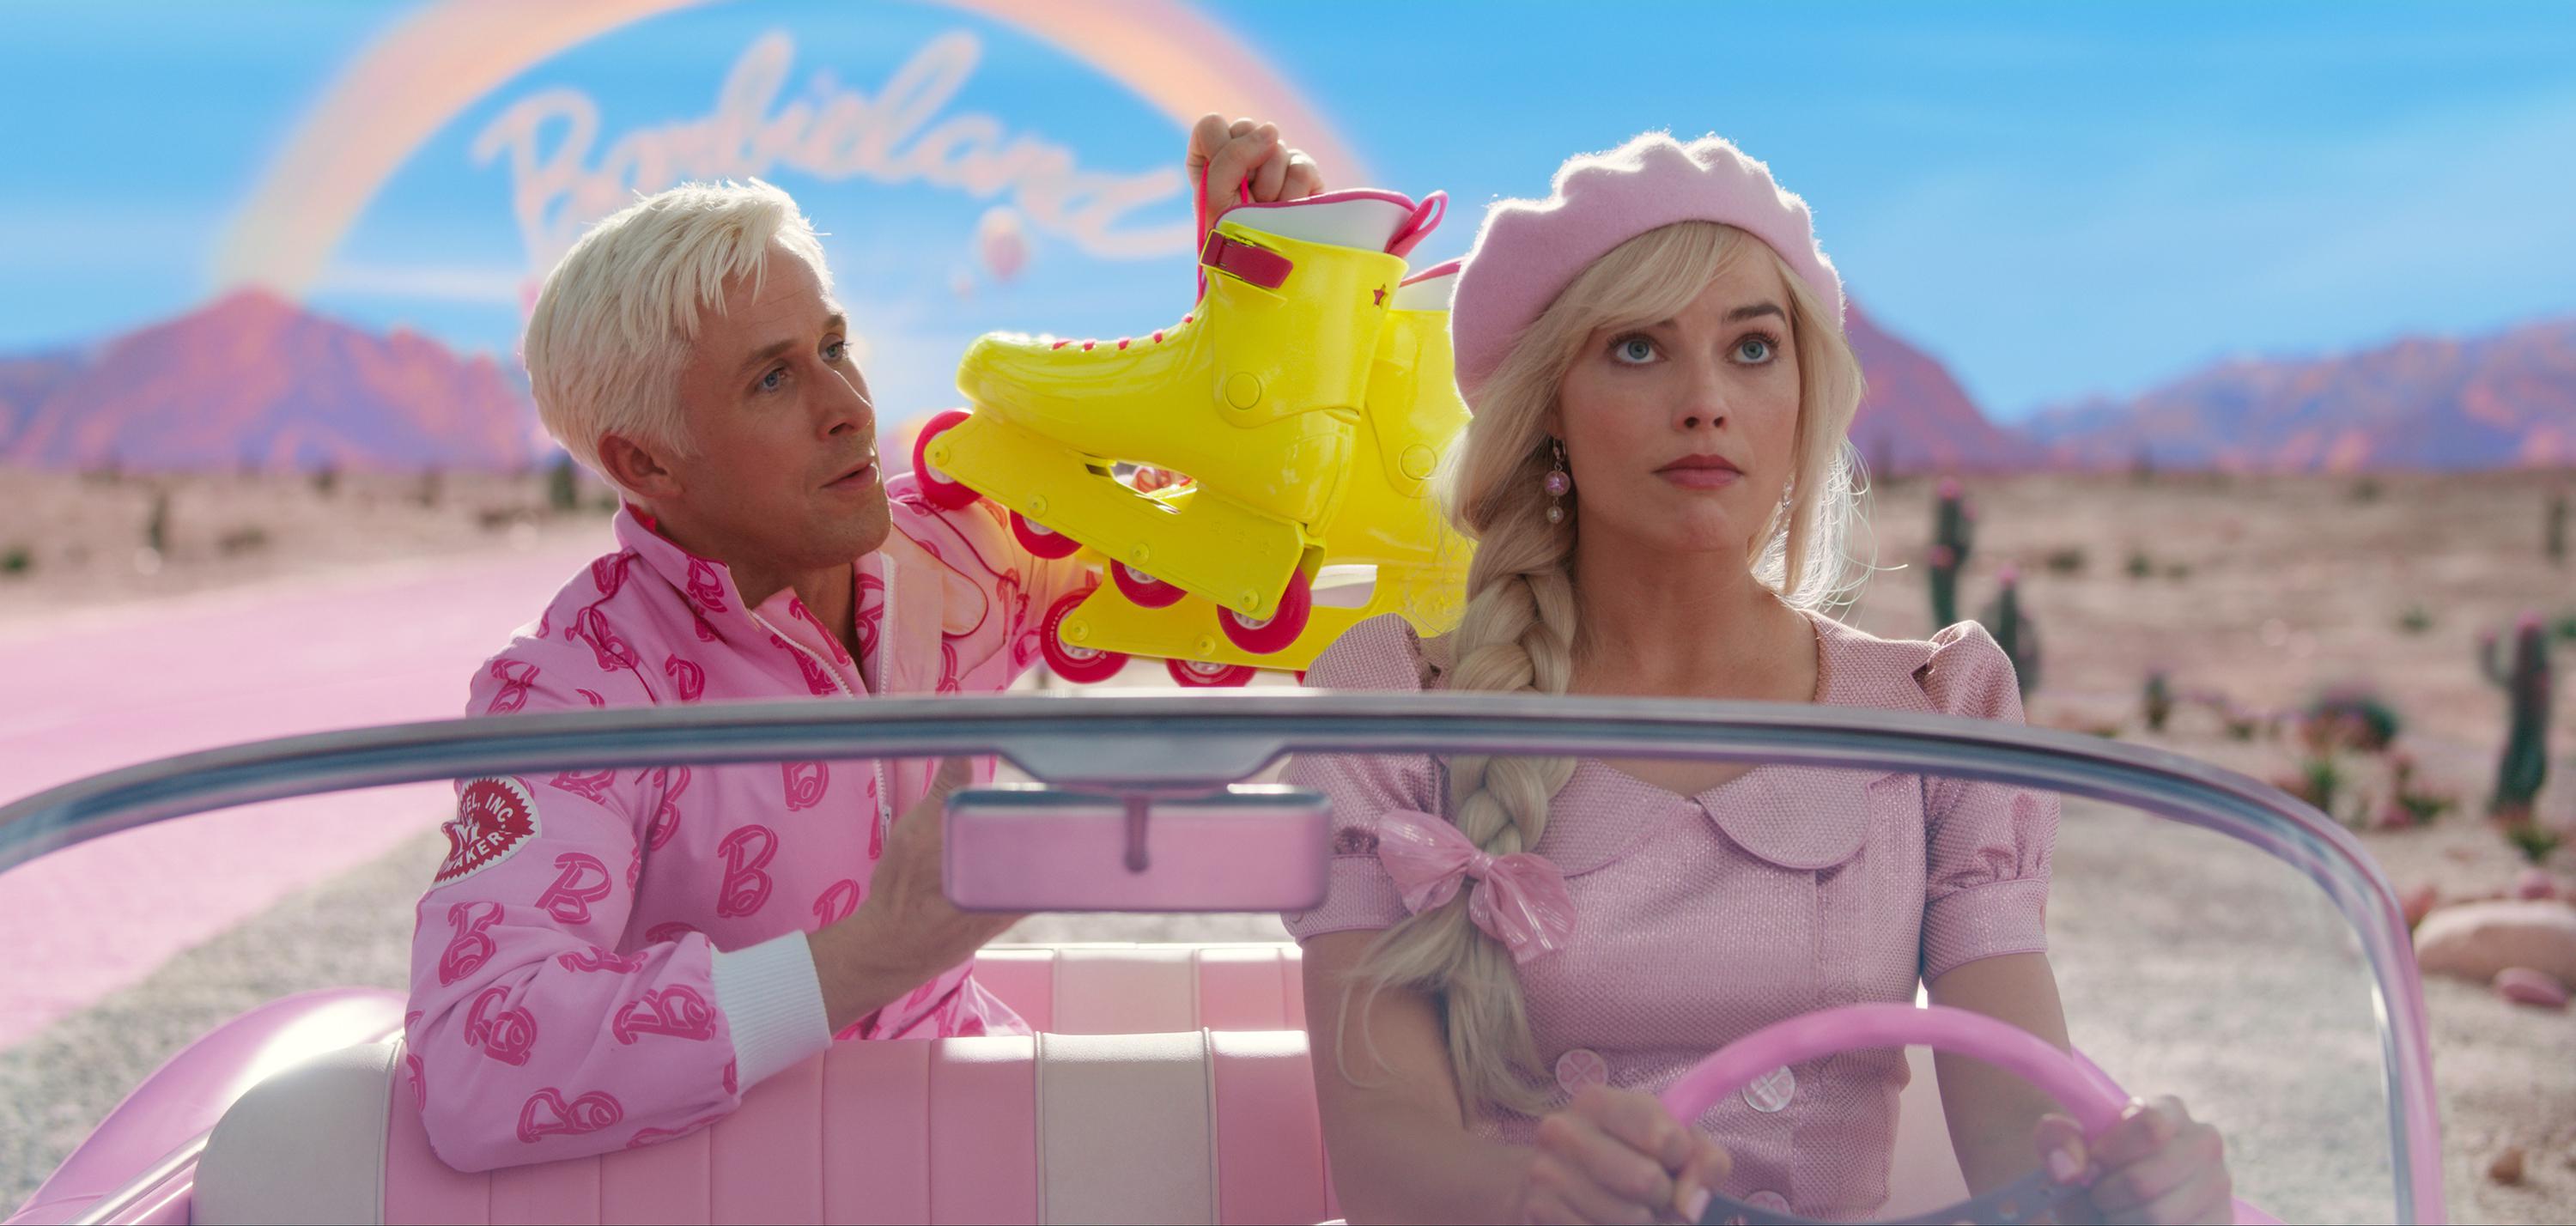 From Barbie to 'Fast X,' here's what you'll be heading to the theater for  this summer